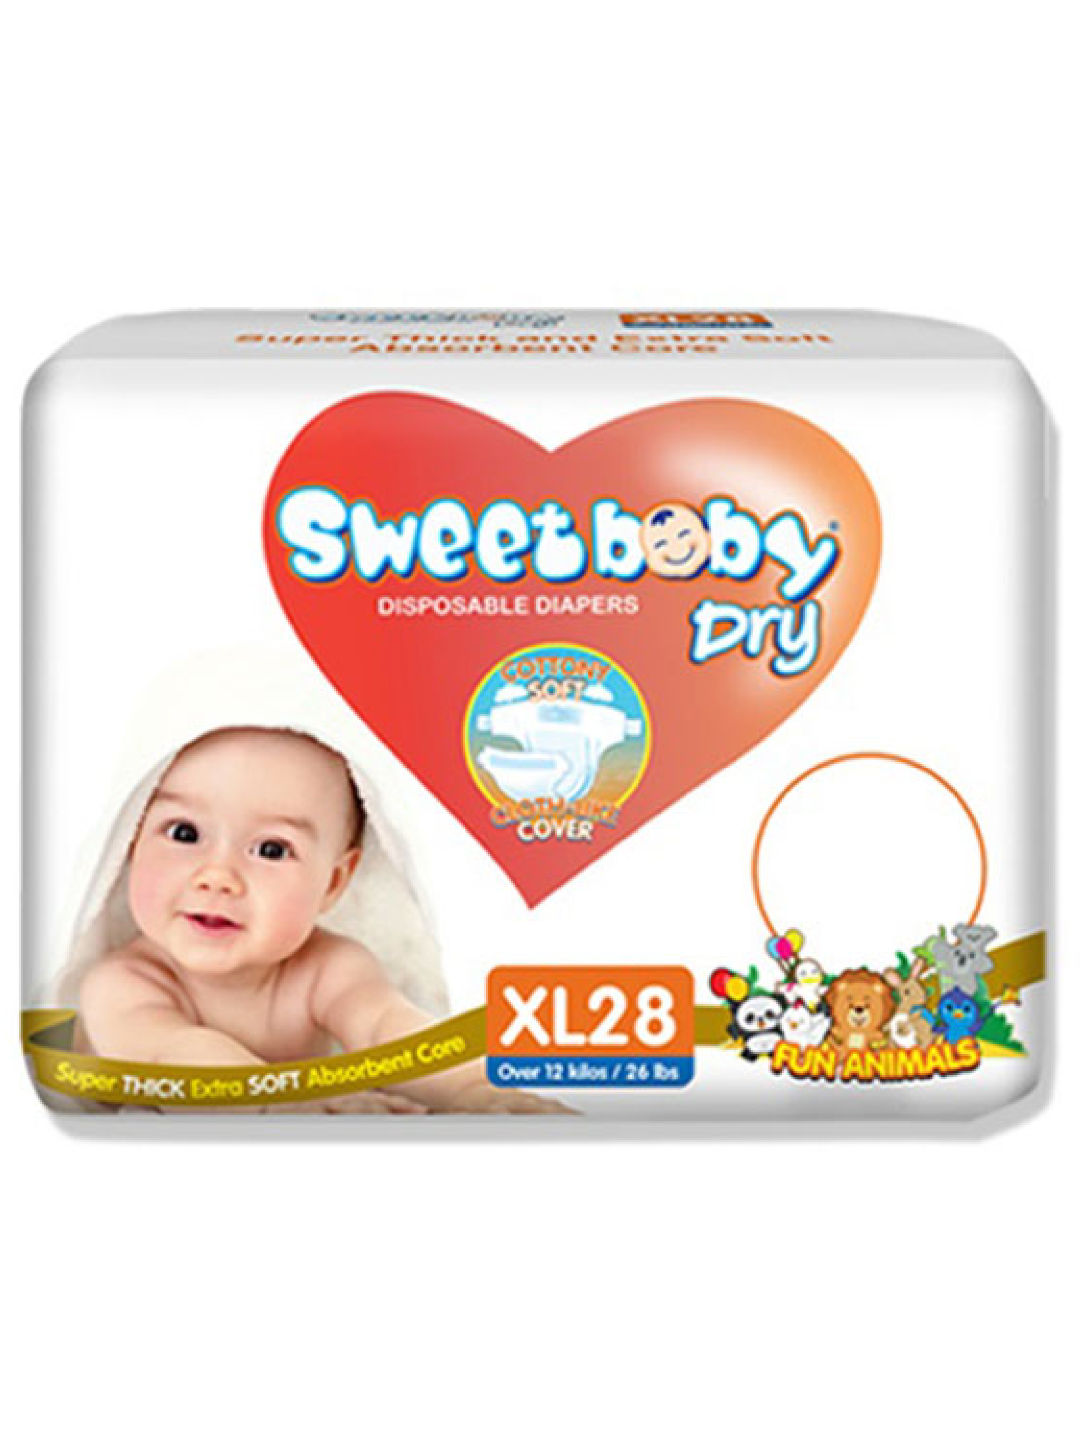 Sweetbaby Dry Disposable Diapers XL Econo pack (28s)